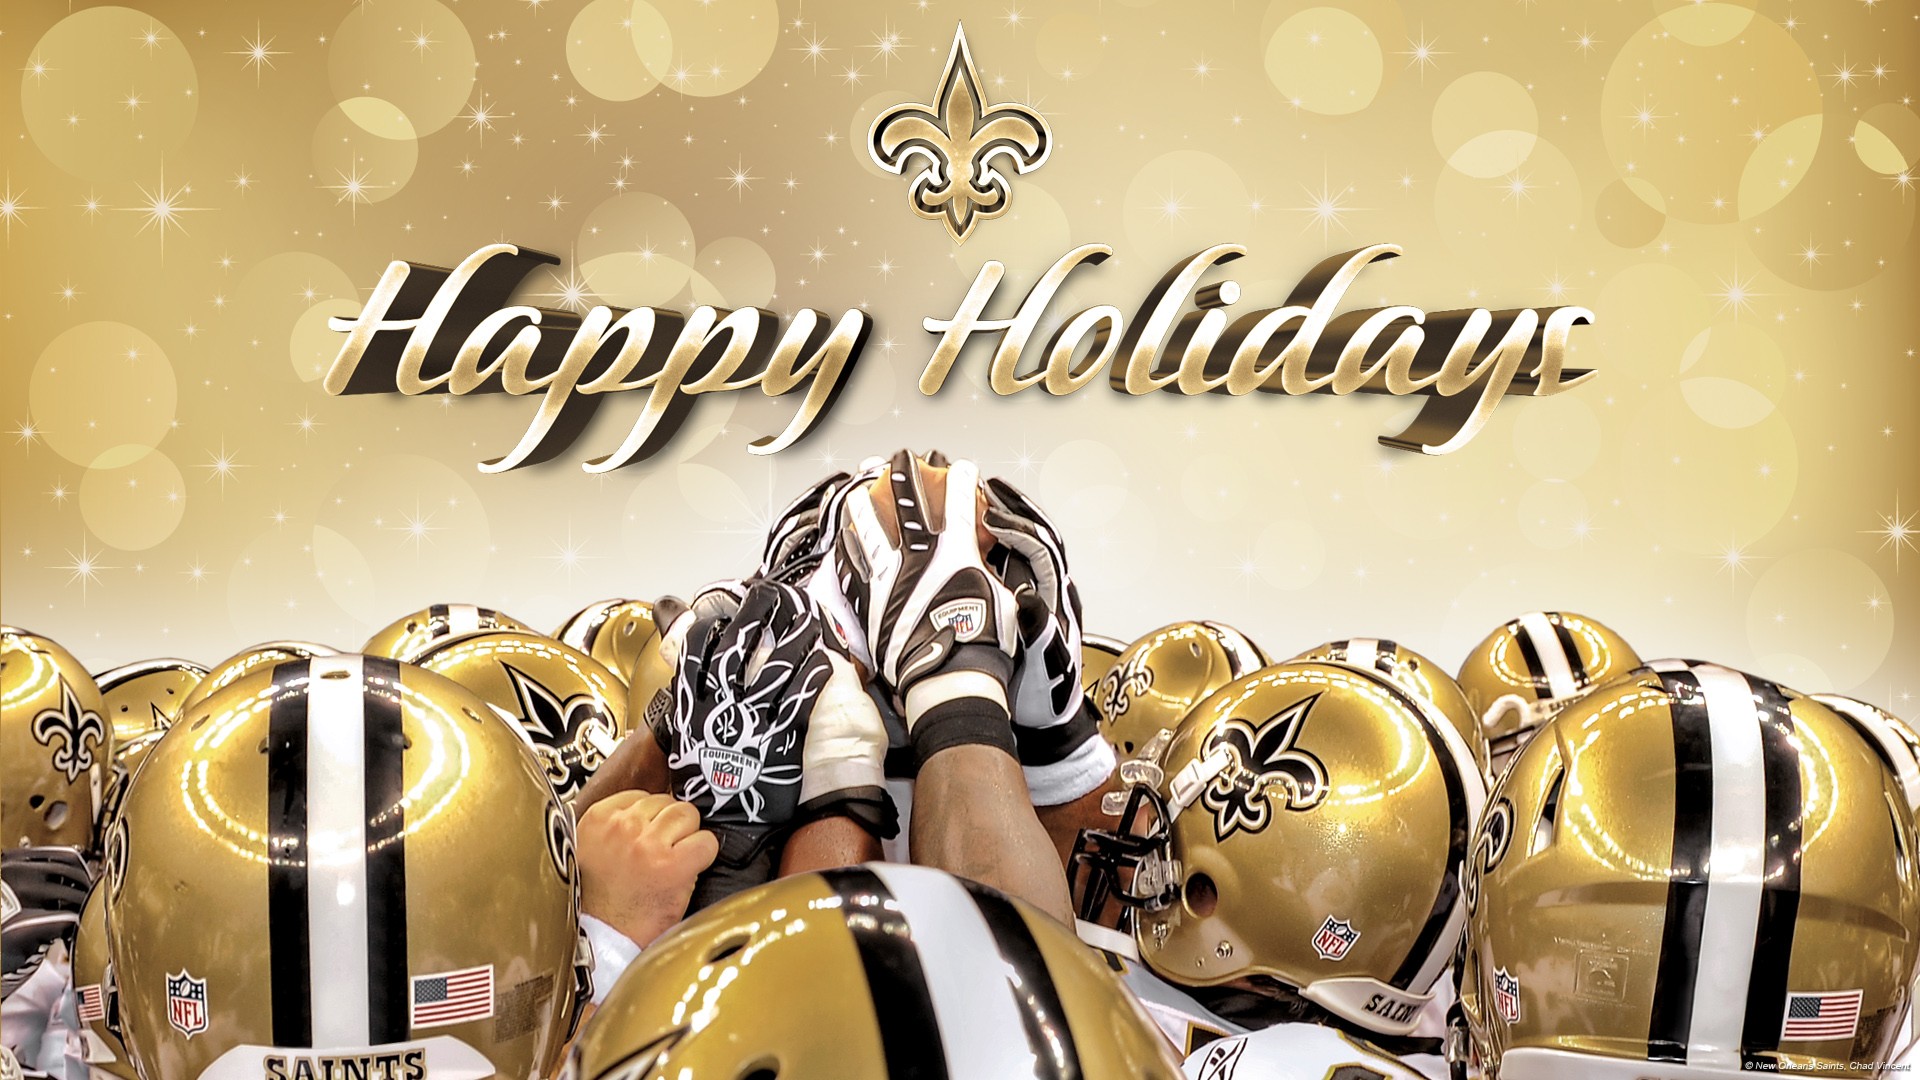 New Orleans Saints Desktop Wallpapers With Resolution 1920X1080 pixel. You can make this wallpaper for your Mac or Windows Desktop Background, iPhone, Android or Tablet and another Smartphone device for free